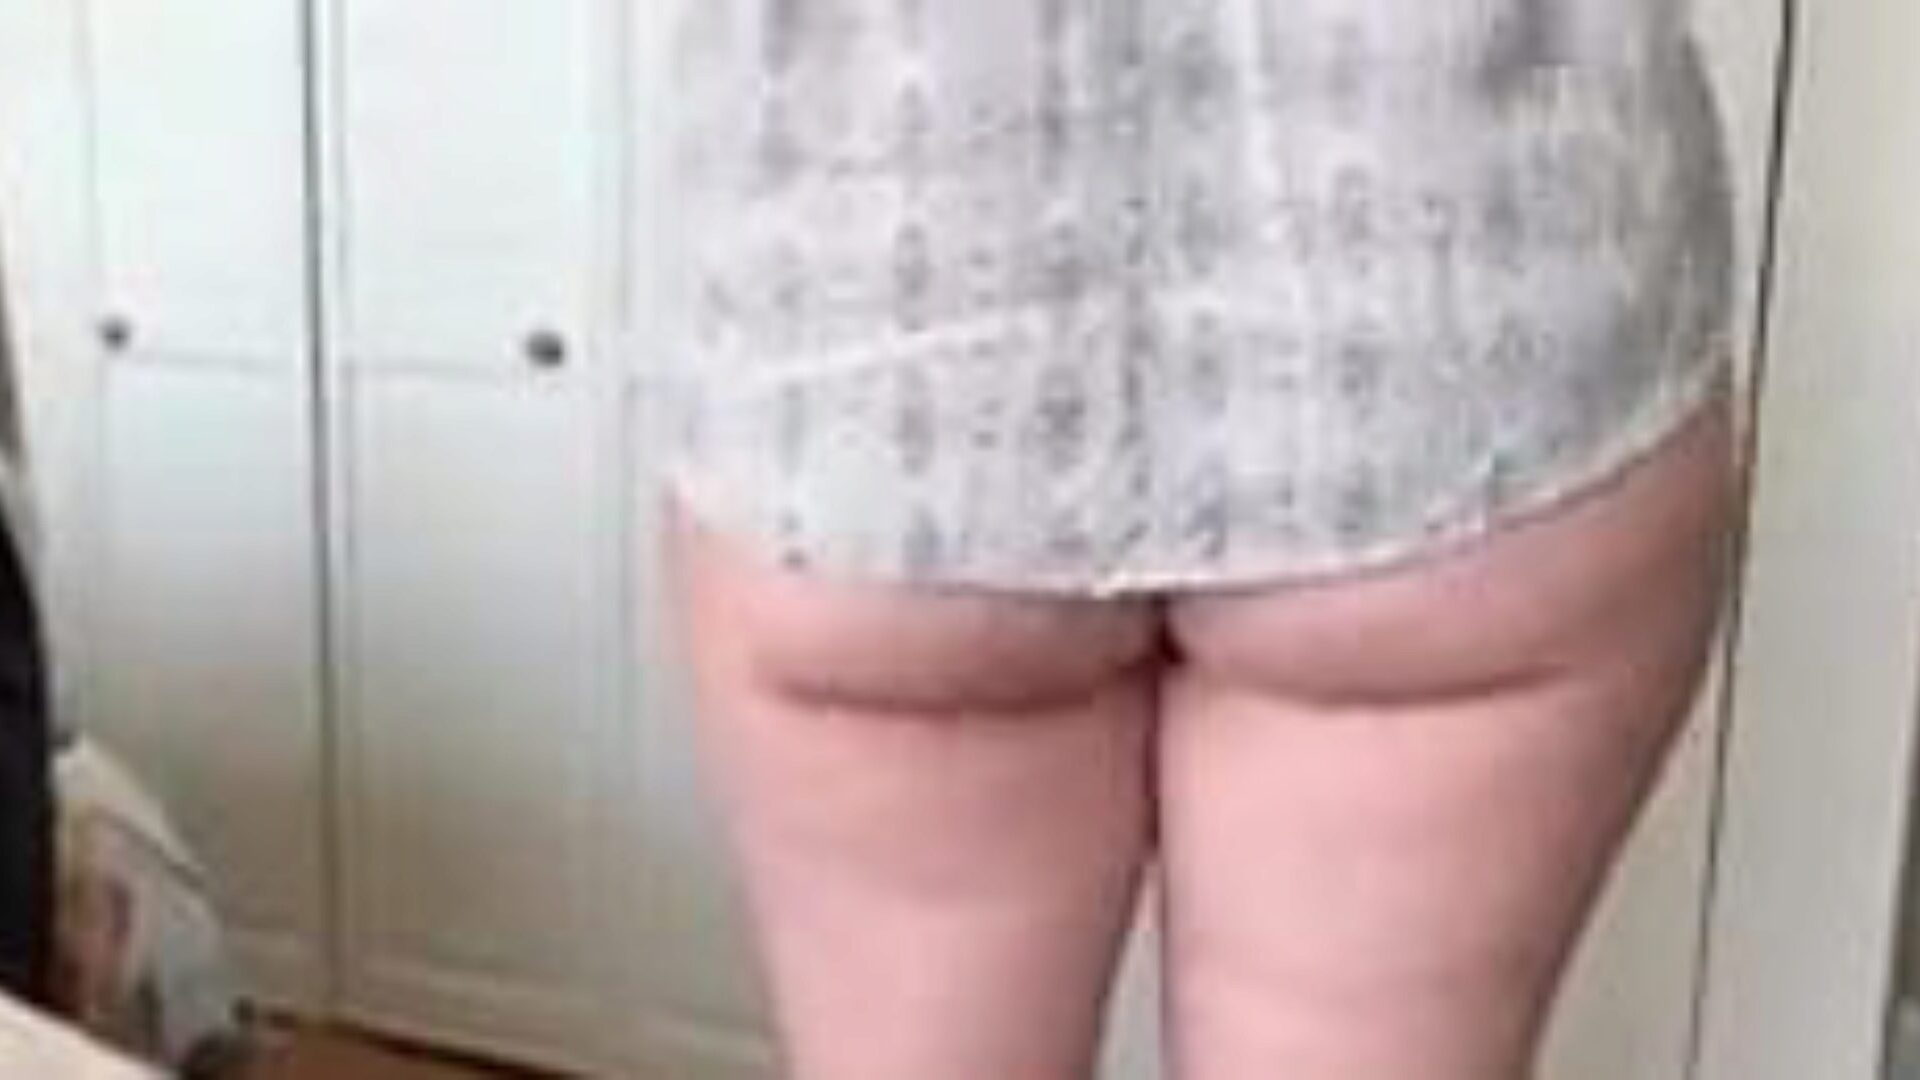 Booty Shaking mother I'd like to fuck - PAWG Ass Jiggle, HD Porn c0: xHamster | xHamster Watch Booty Shaking mother I'd like to fuck - PAWG Ass Jiggle movie scene on xHamster, the most good HD hump tube website with tons of free Mobile MILF mother I'd like to fuck Twitter & Xxx Ass porn videos